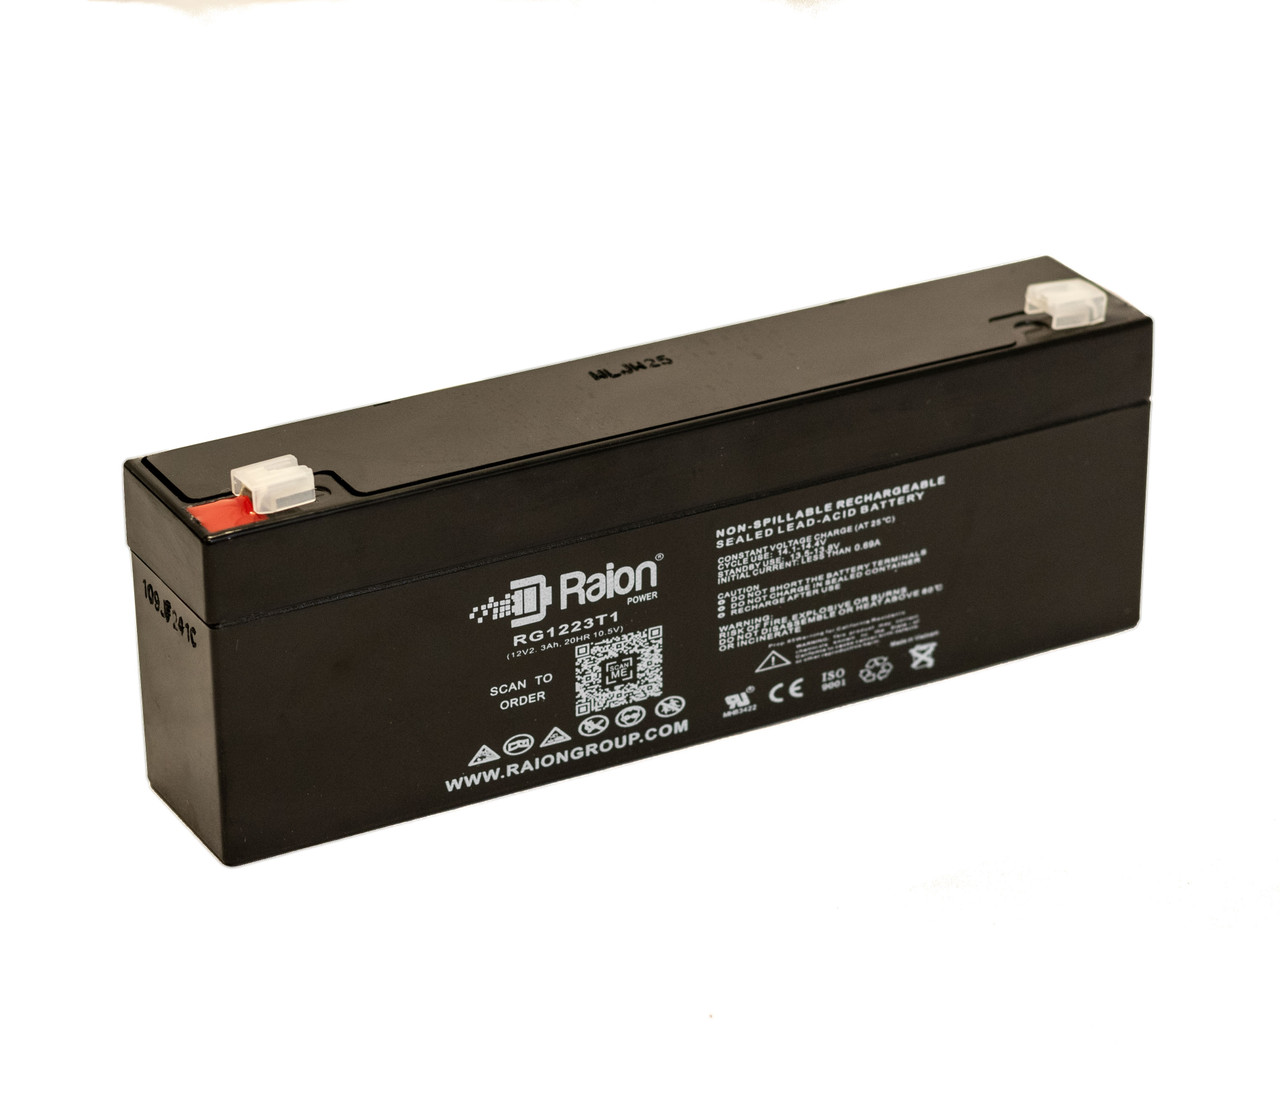 Raion Power RG1223T1 12V 2.3Ah Replacement UPS Battery for IntelliPower 3000VA 2100W FA00123